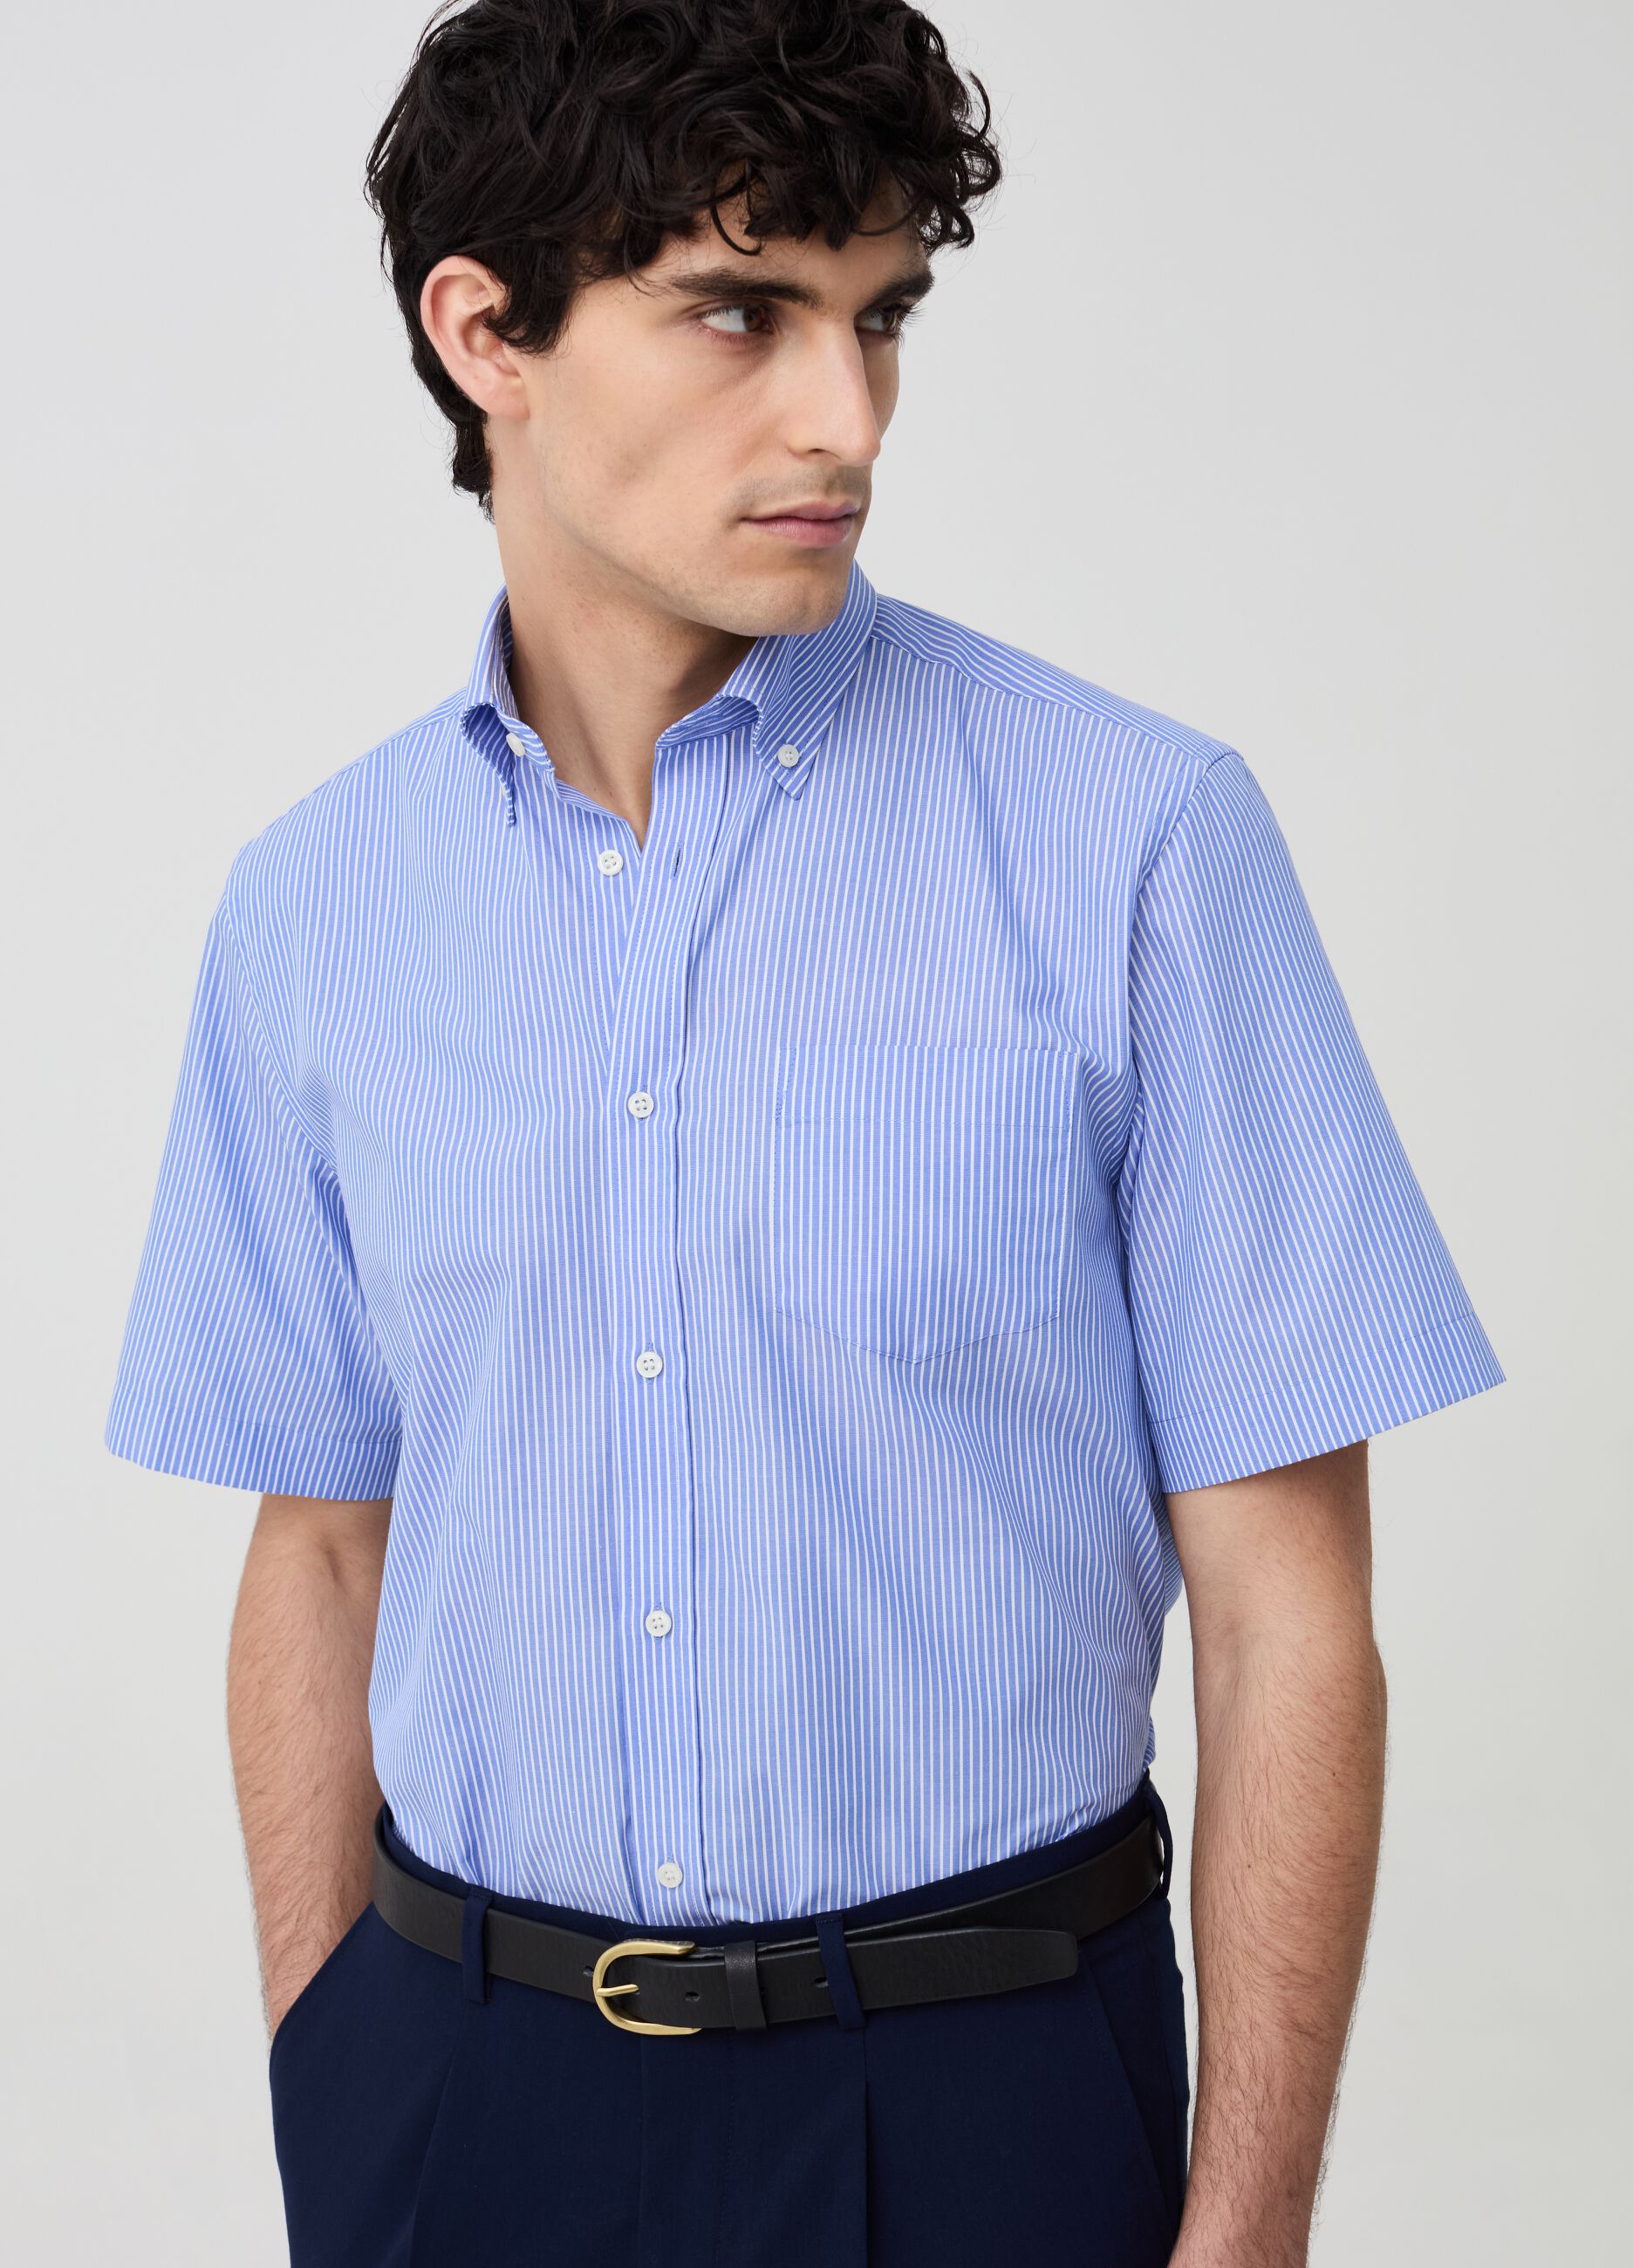 Short-sleeved shirt with striped pattern